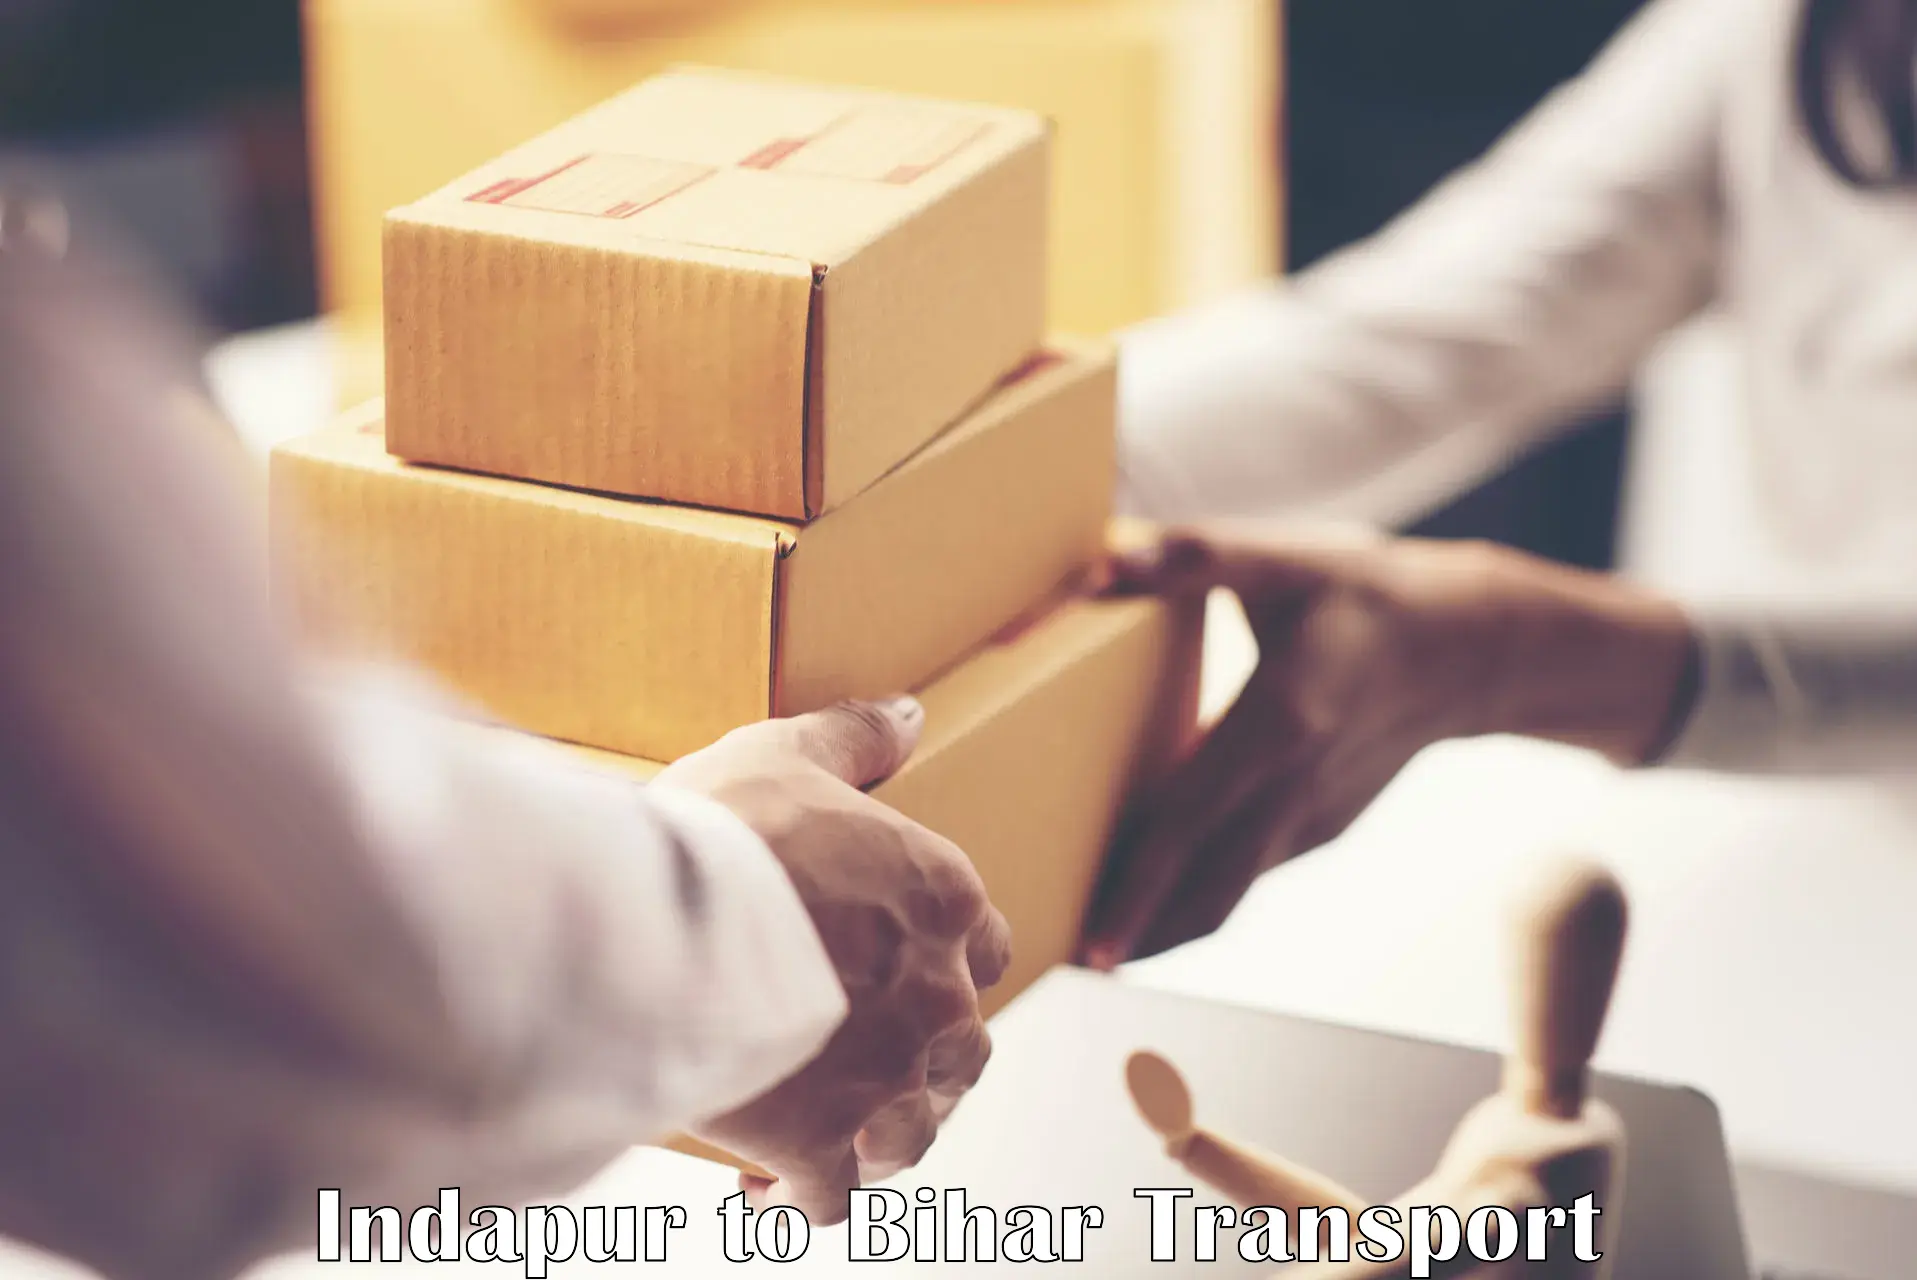 Shipping services in Indapur to Samastipur